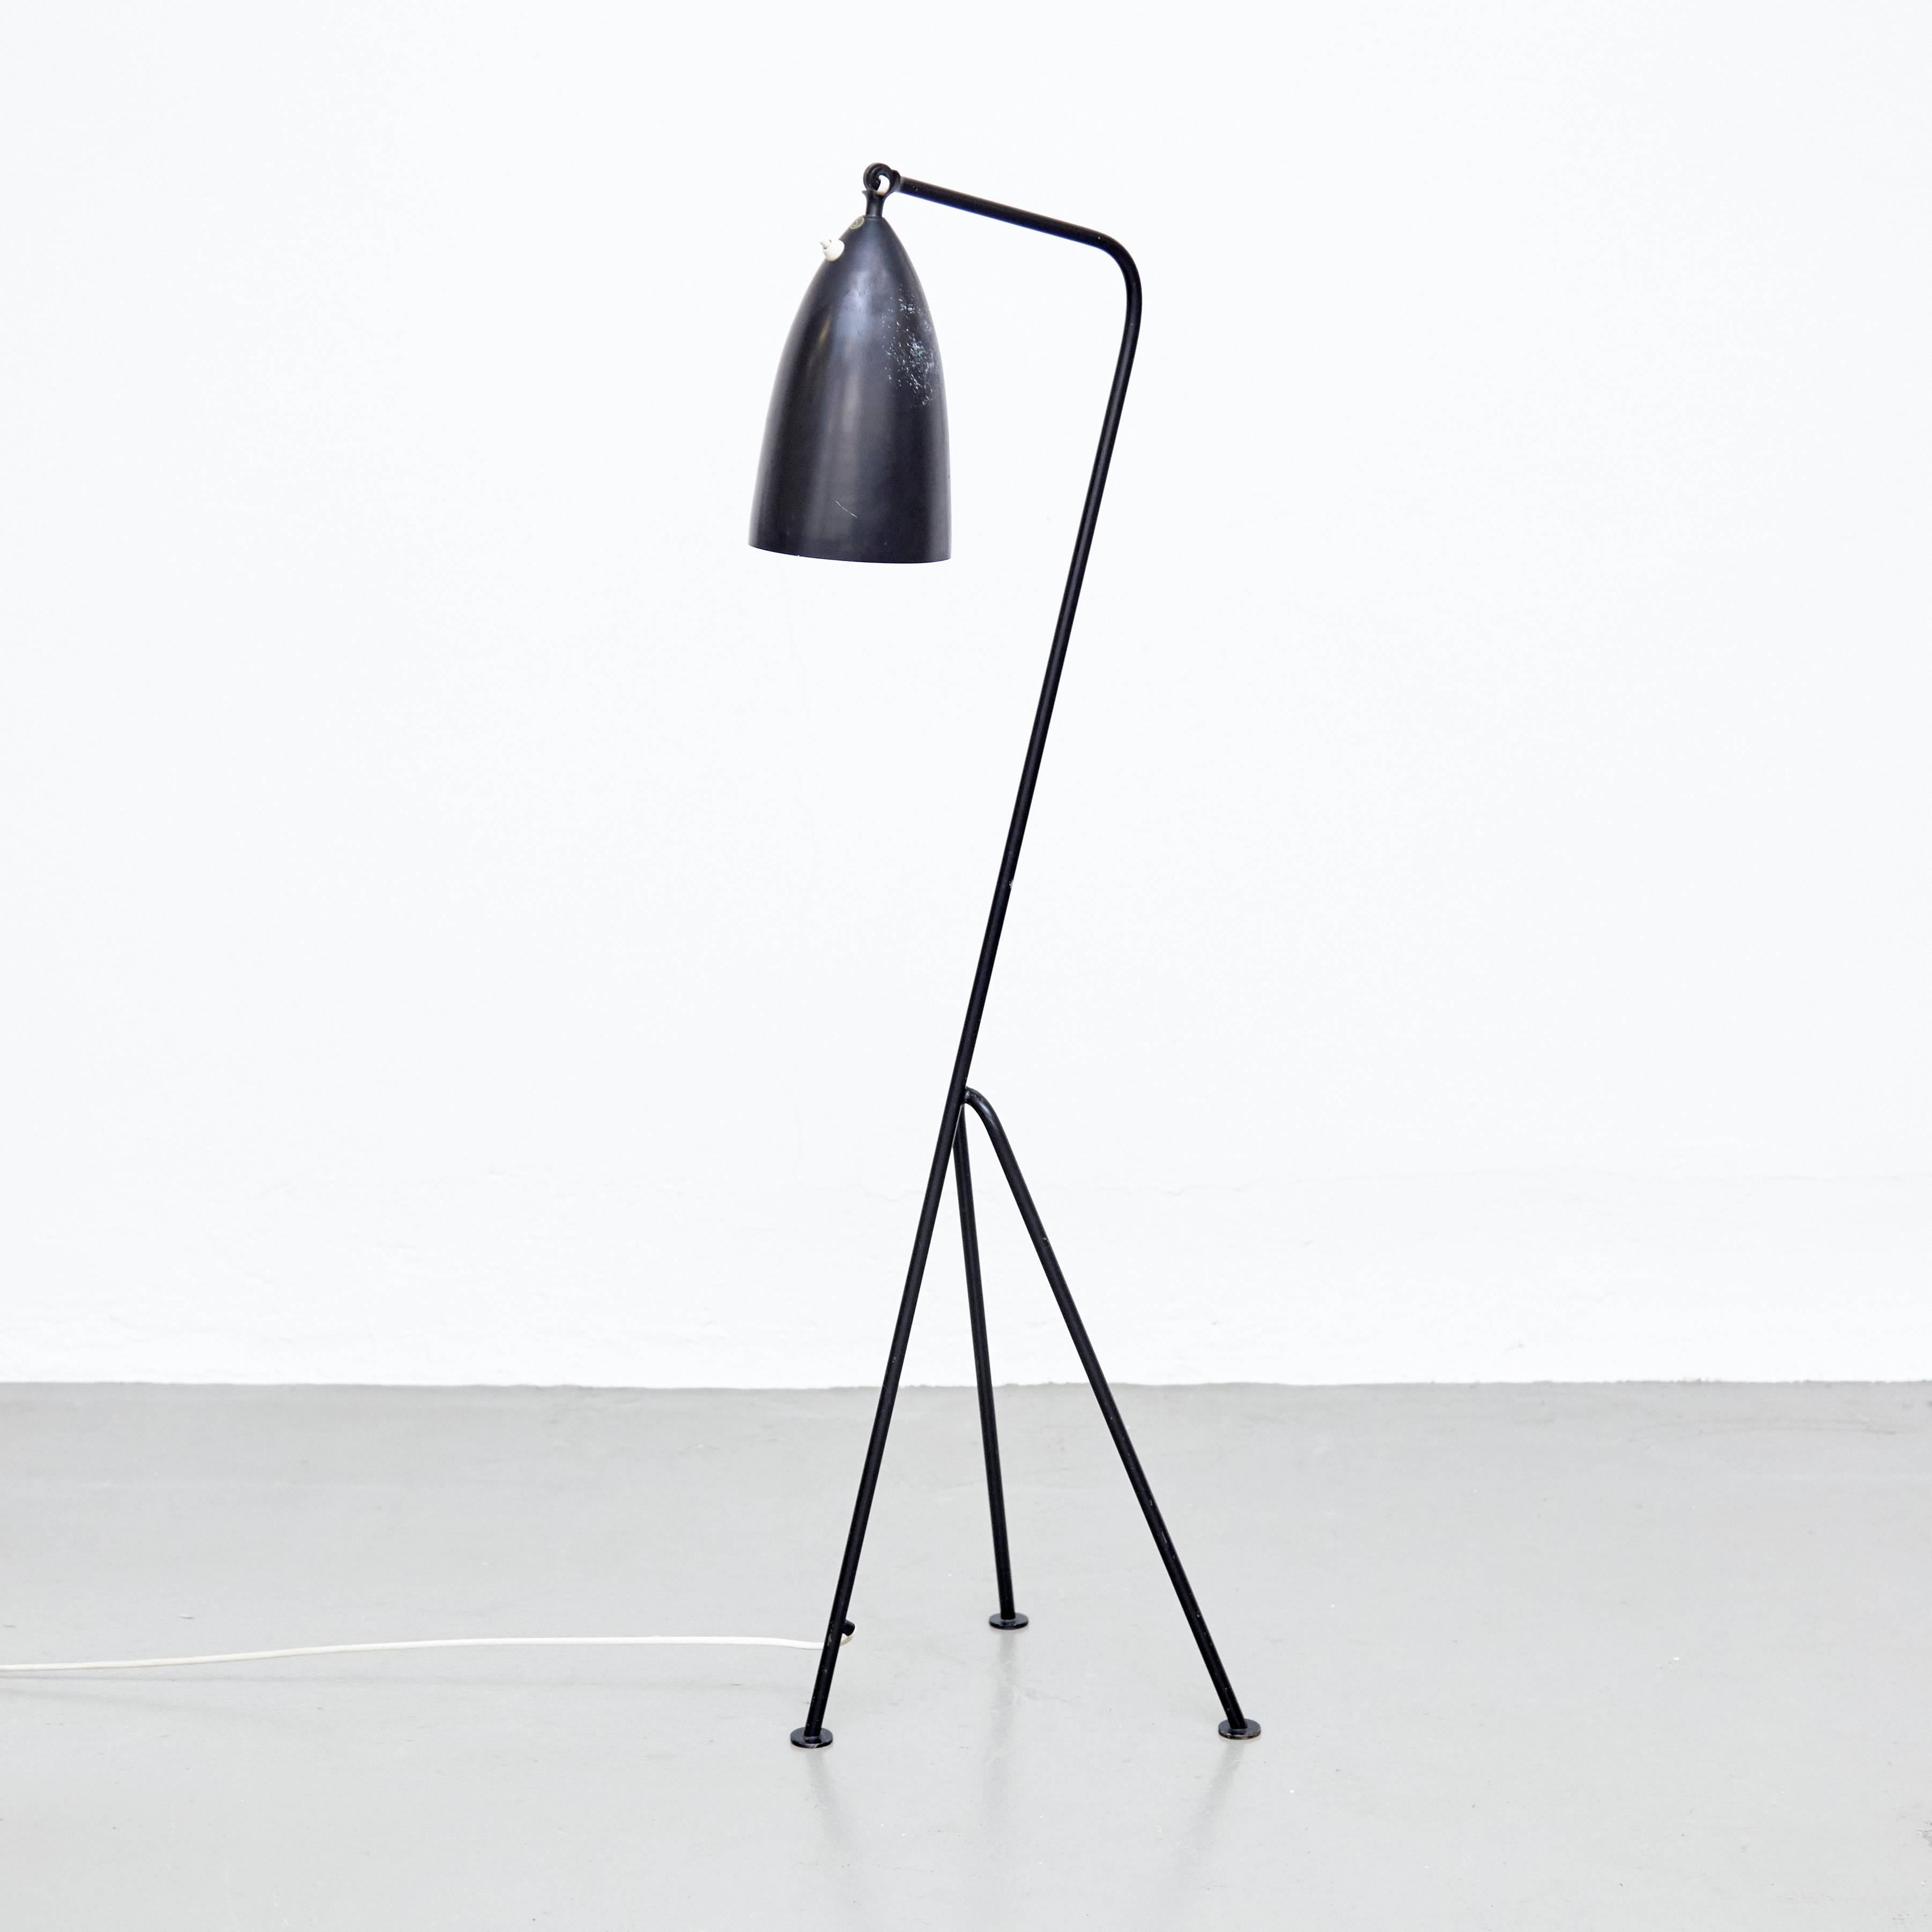 Floor lamp designed by Greta Magnusson Grossman in Sweden, circa 1947.

In good original condition, with minor wear consistent with age and use, preserving a beautiful patina.

Greta Magnusson-Grossman (July 21, 1906 – August 1999) was a Swedish